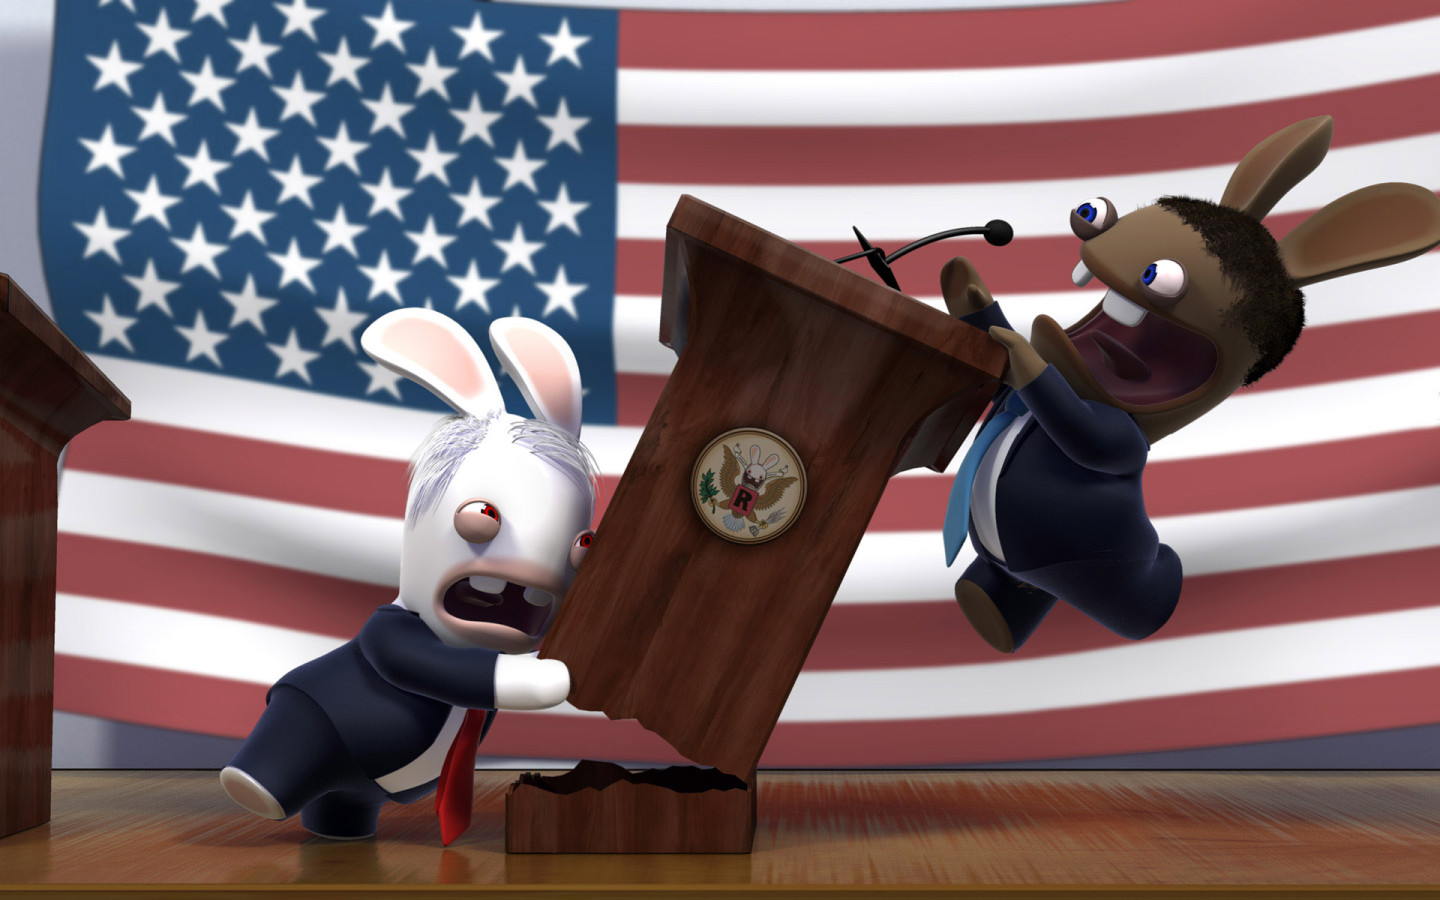 Obama, wallpaper, funny, mccain, stores, rabbit, pictures, abstract, 